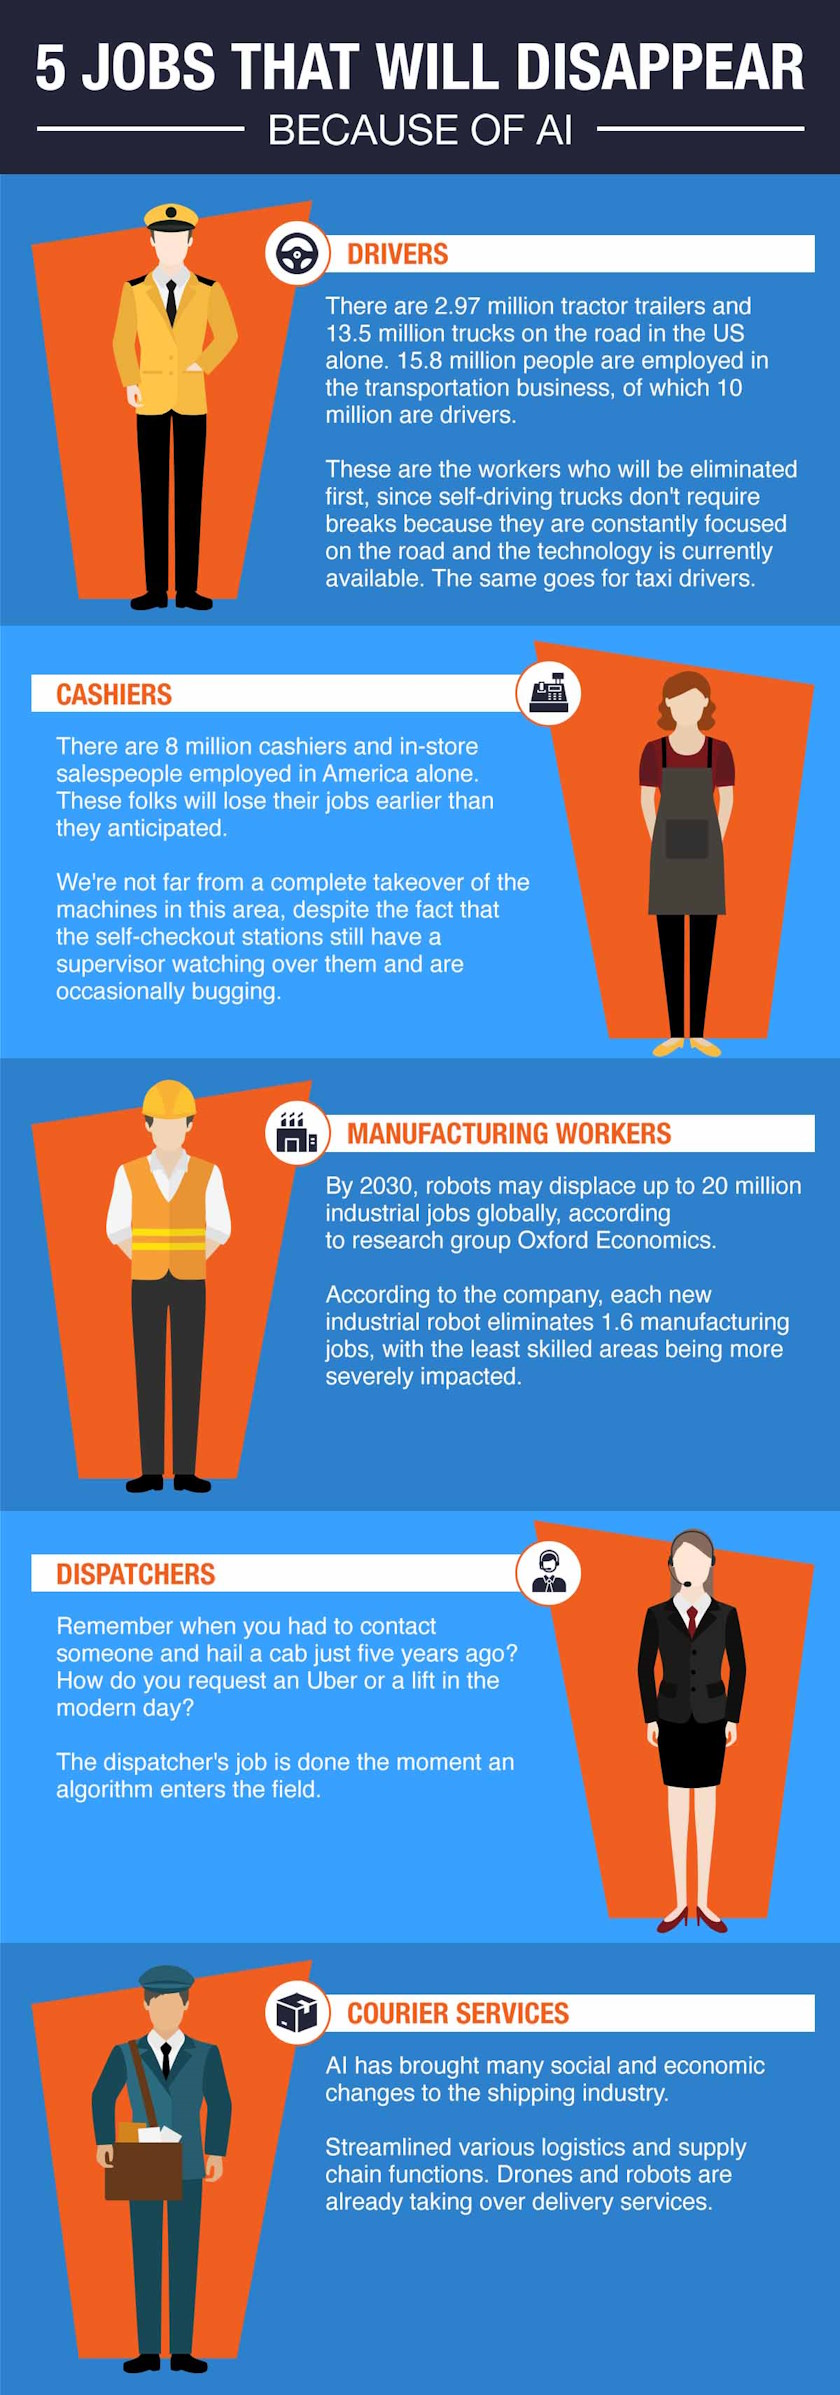 5 jobs that will disappear